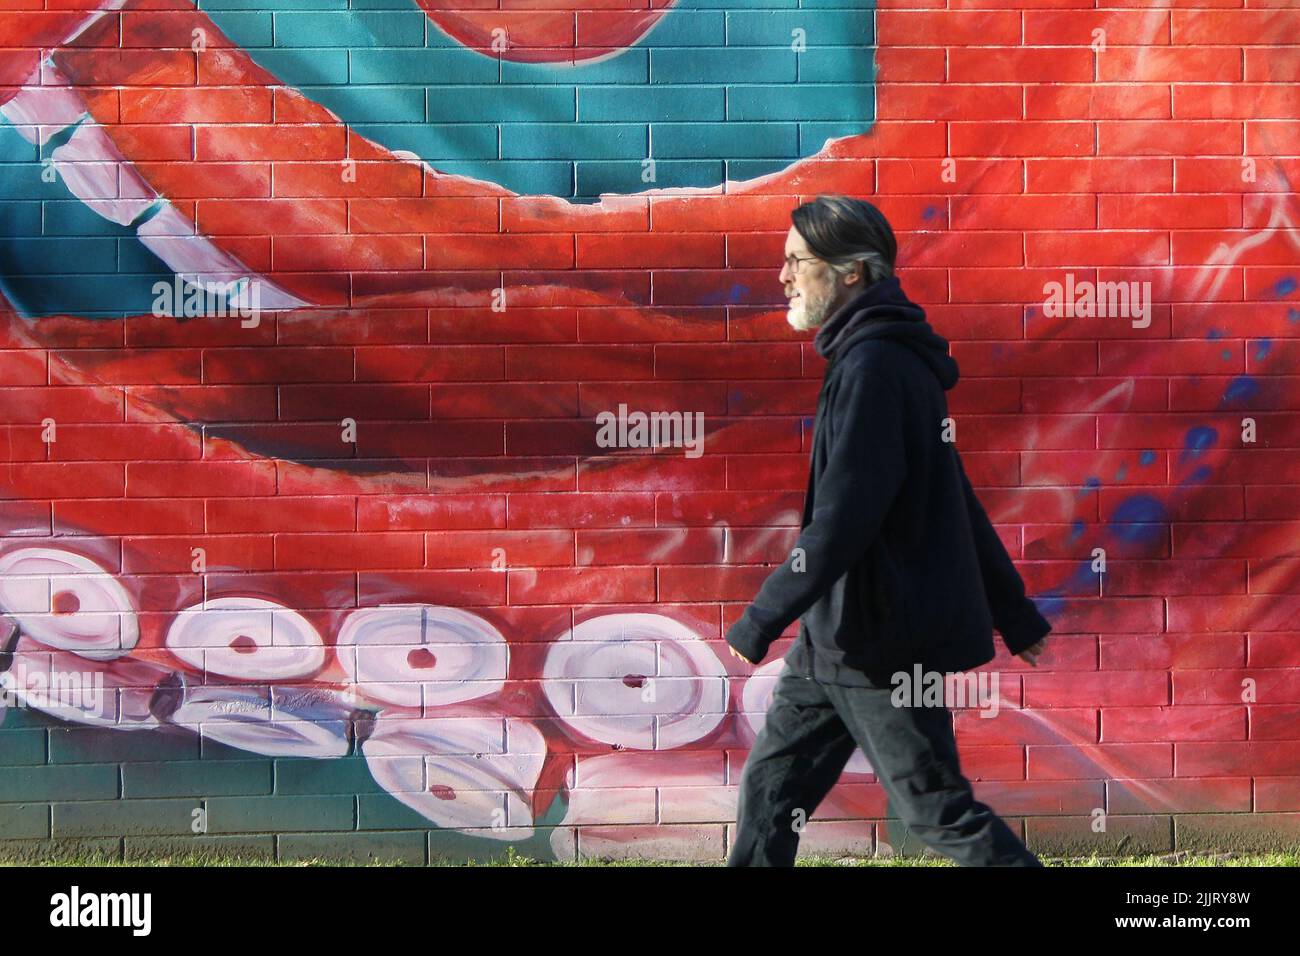 A Photo Of A Man In Black Walking Past Red Octopus Mural In Vancouver